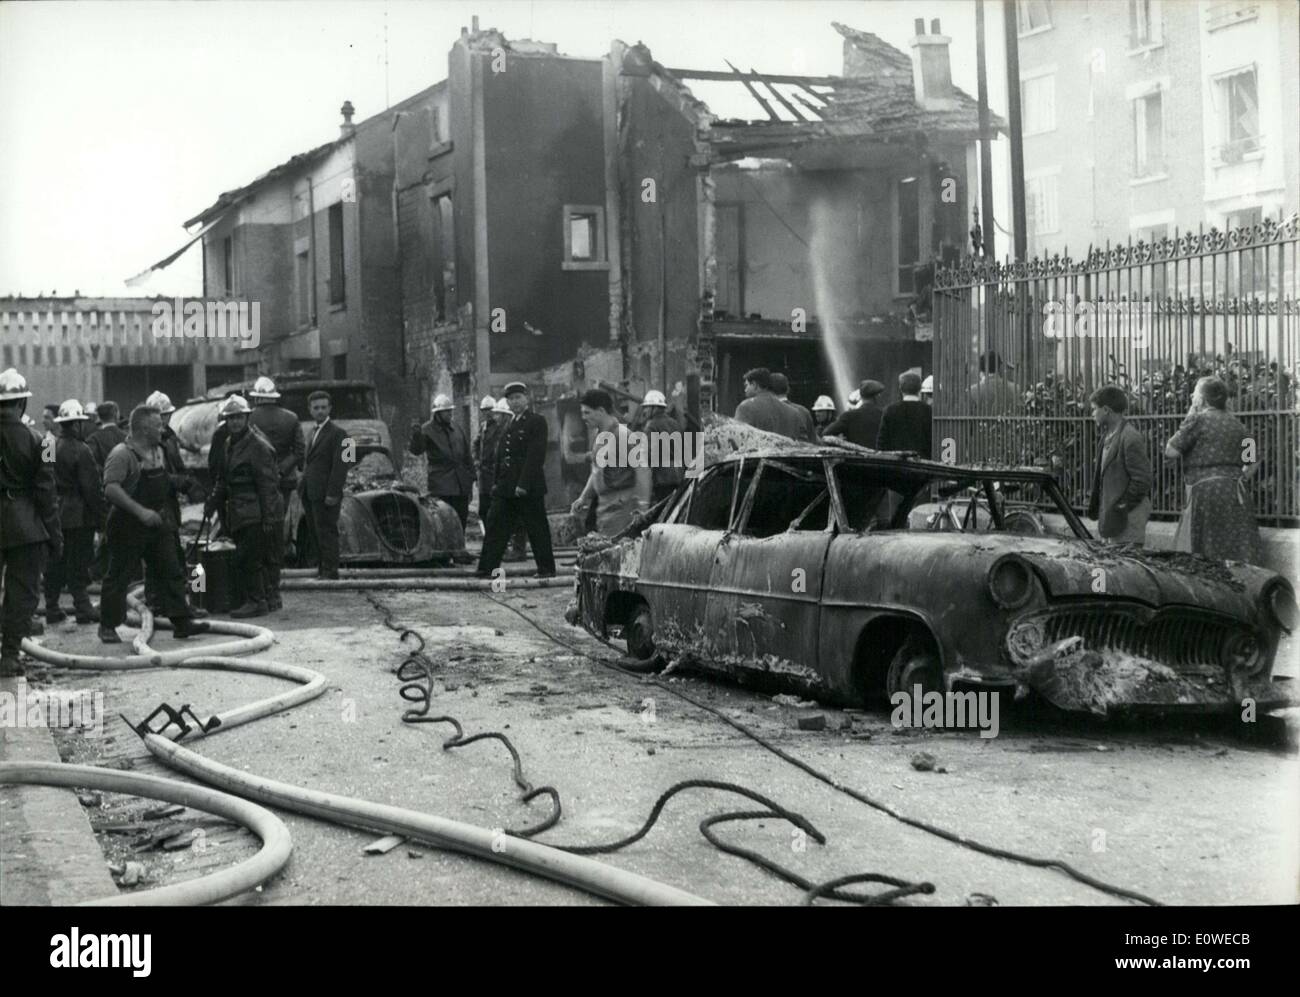 Jul. 11, 1962 - In the Colombes garage, a truck carrying gas exploded ...